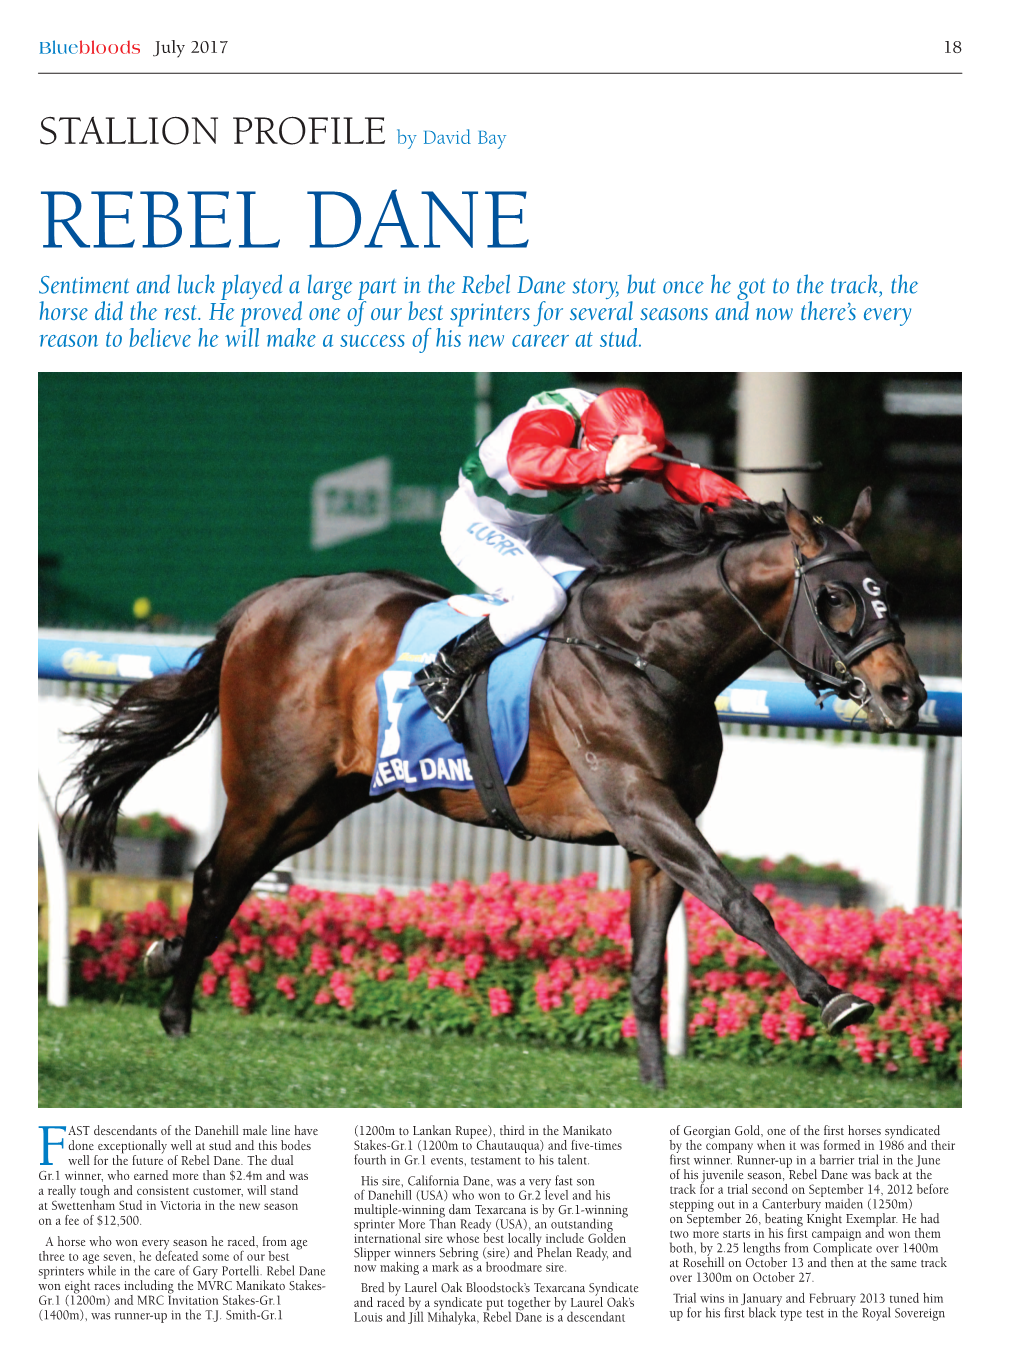 REBEL DANE Sentiment and Luck Played a Large Part in the Rebel Dane Story, but Once He Got to the Track, the Horse Did the Rest